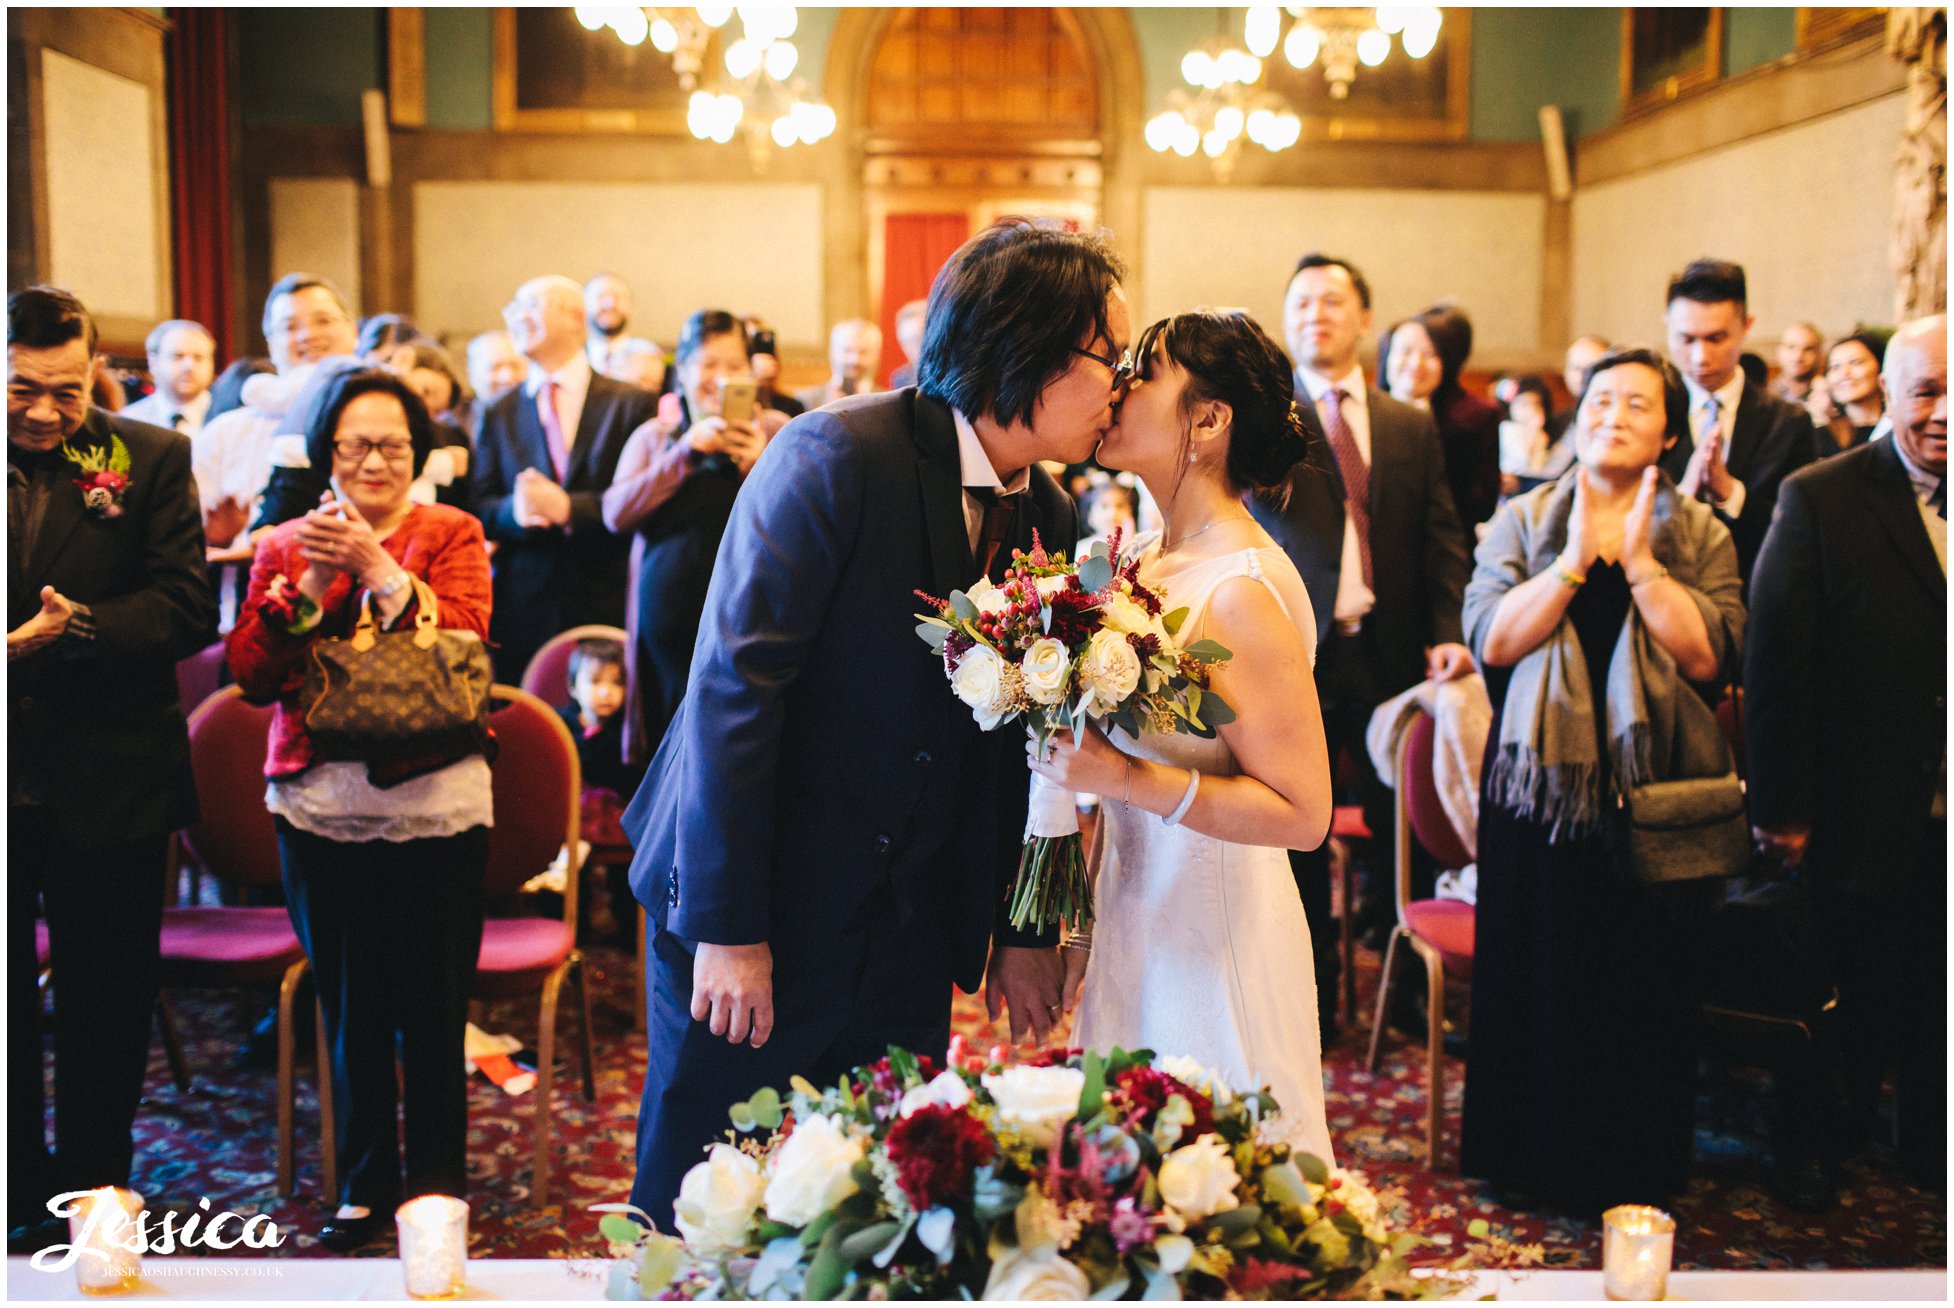 newly wed's share their first kiss